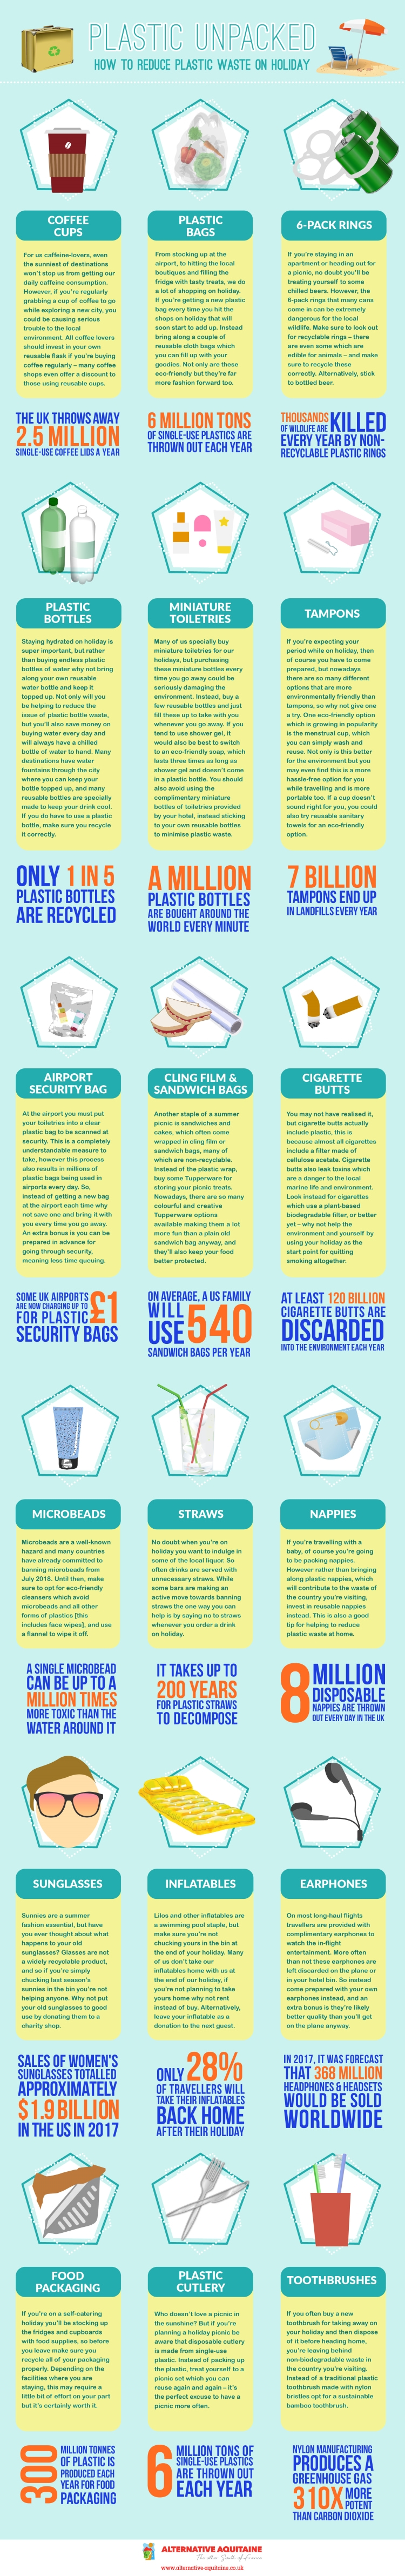 Reduce Plastic on Holiday Infographic